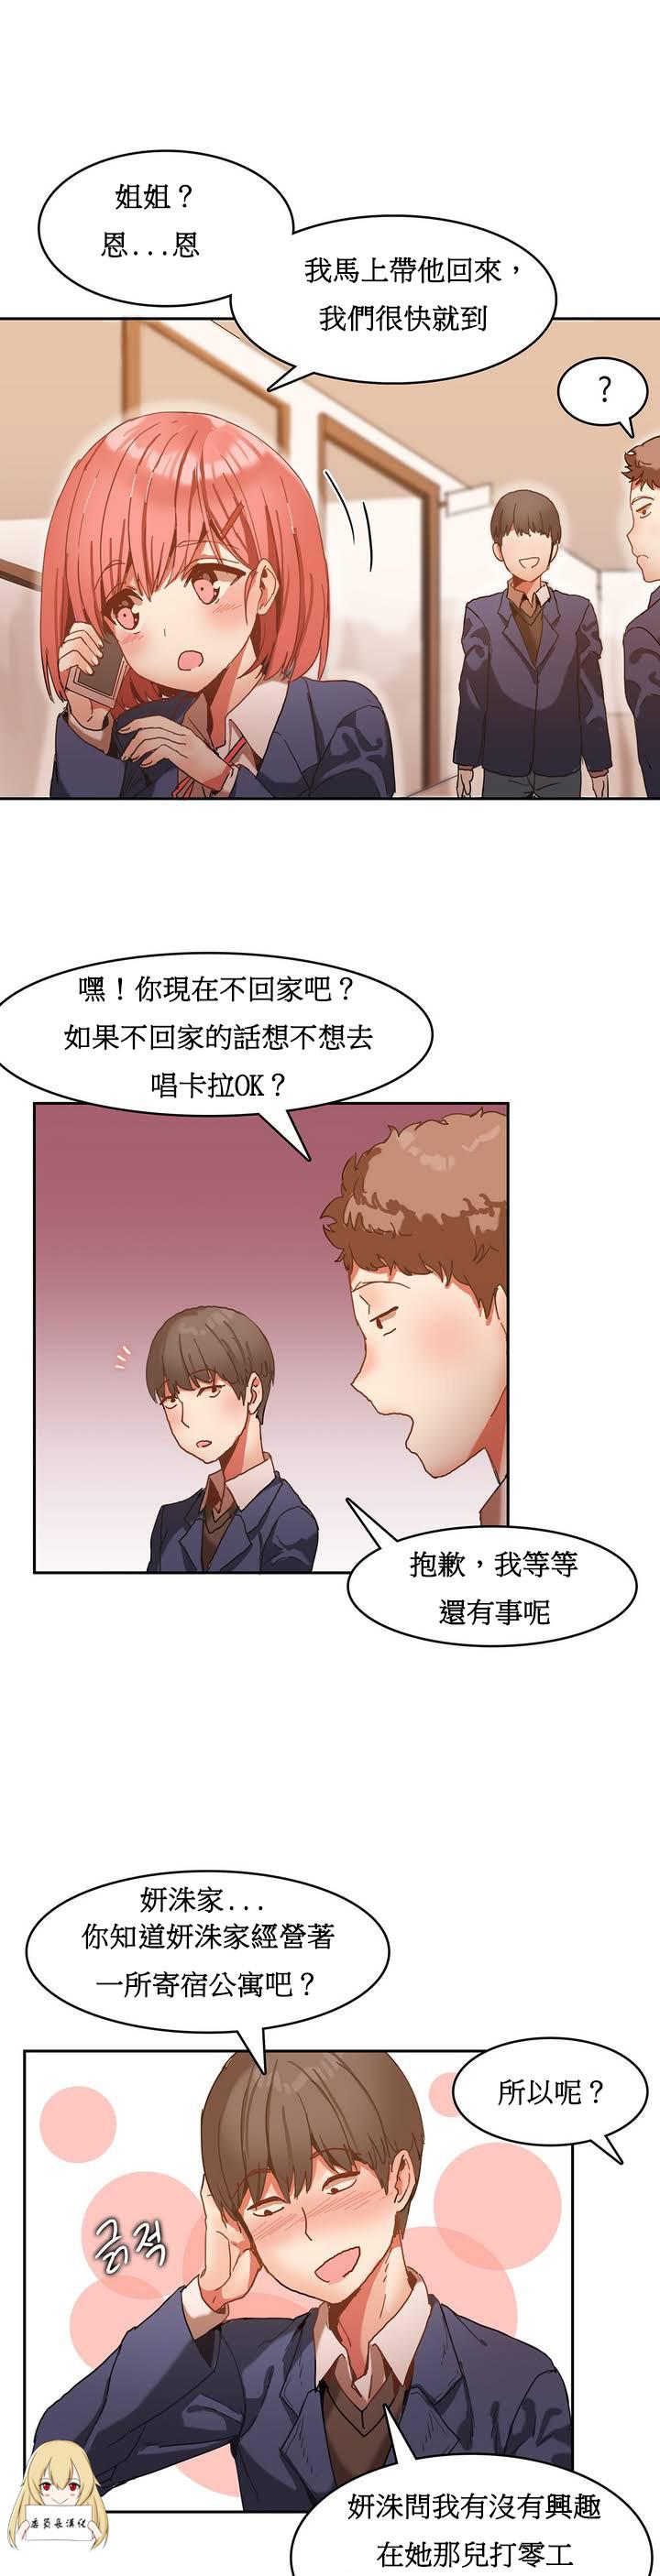 Shecock Hahri's Lumpy Boardhouse Ch. 0~28【委員長個人漢化】（持續更新） Letsdoeit - Page 8